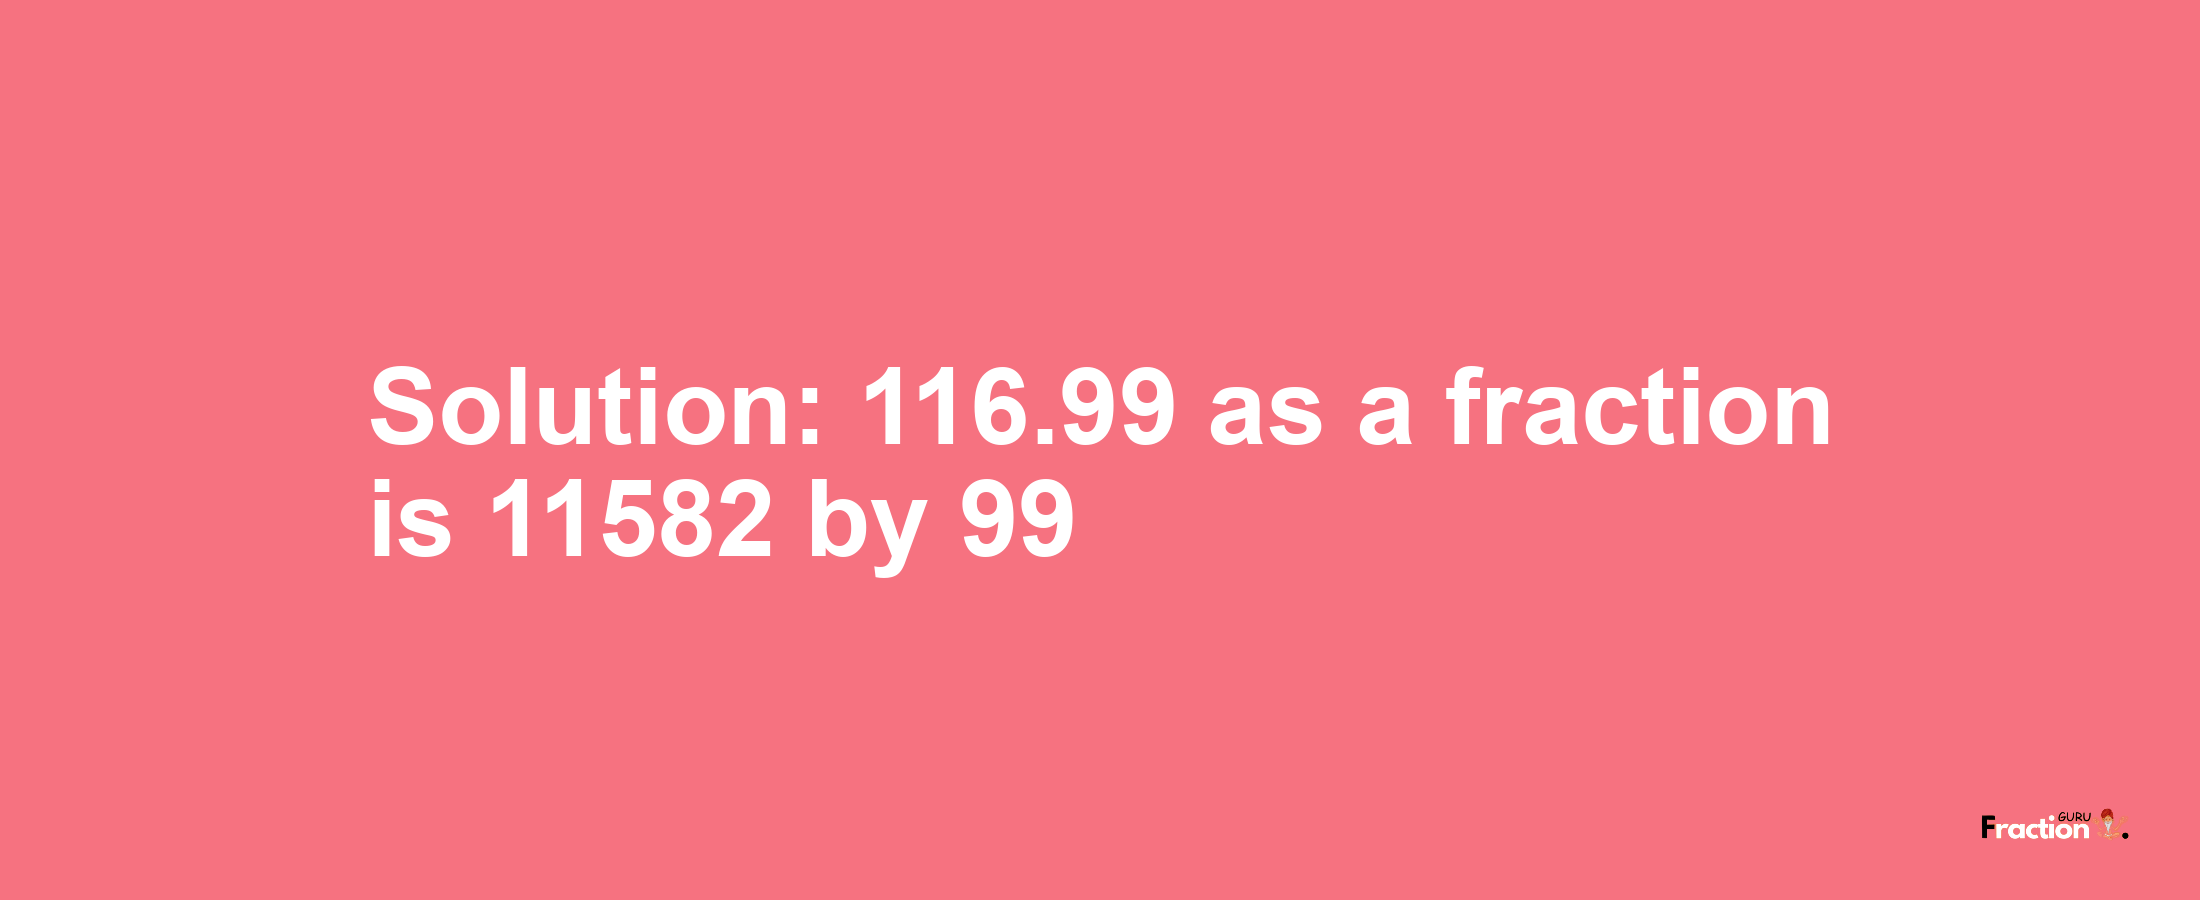 Solution:116.99 as a fraction is 11582/99